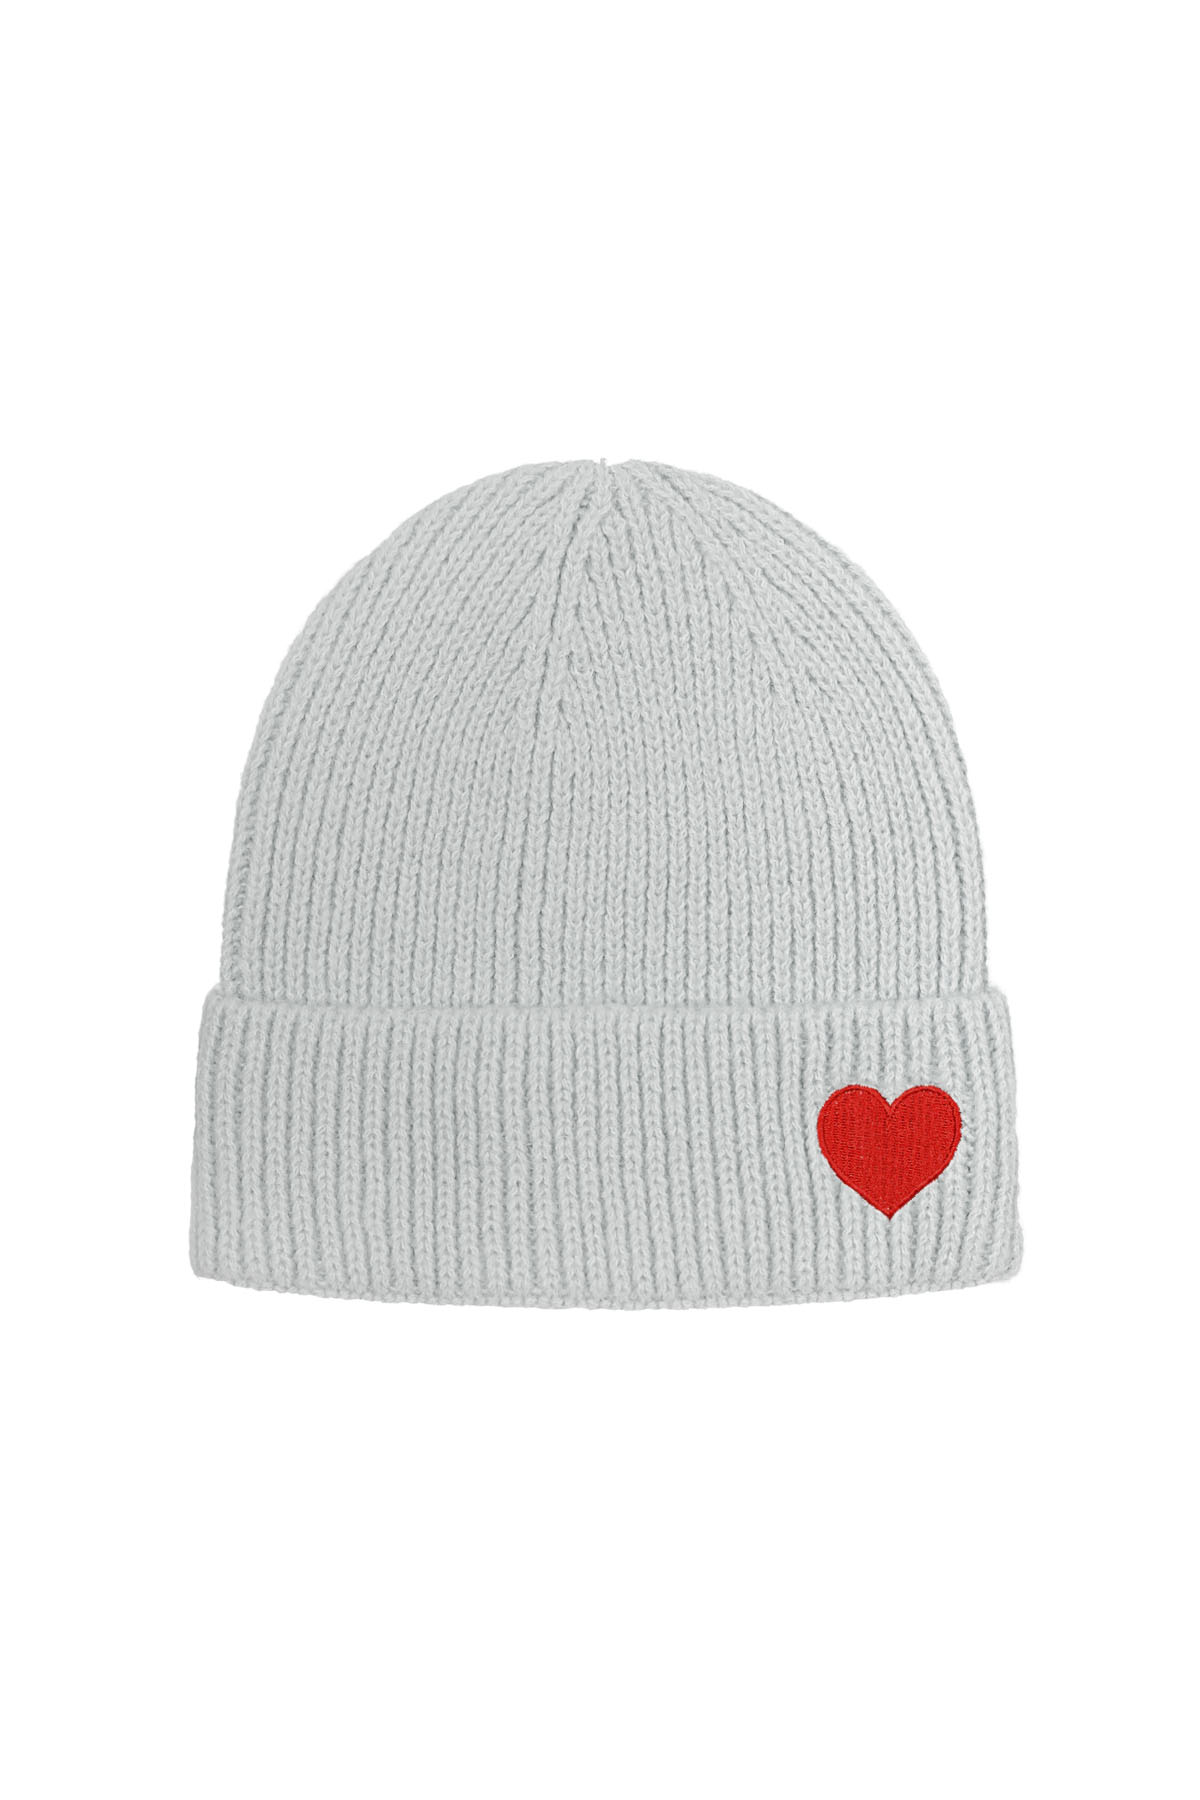 Hat with heart detail - gray